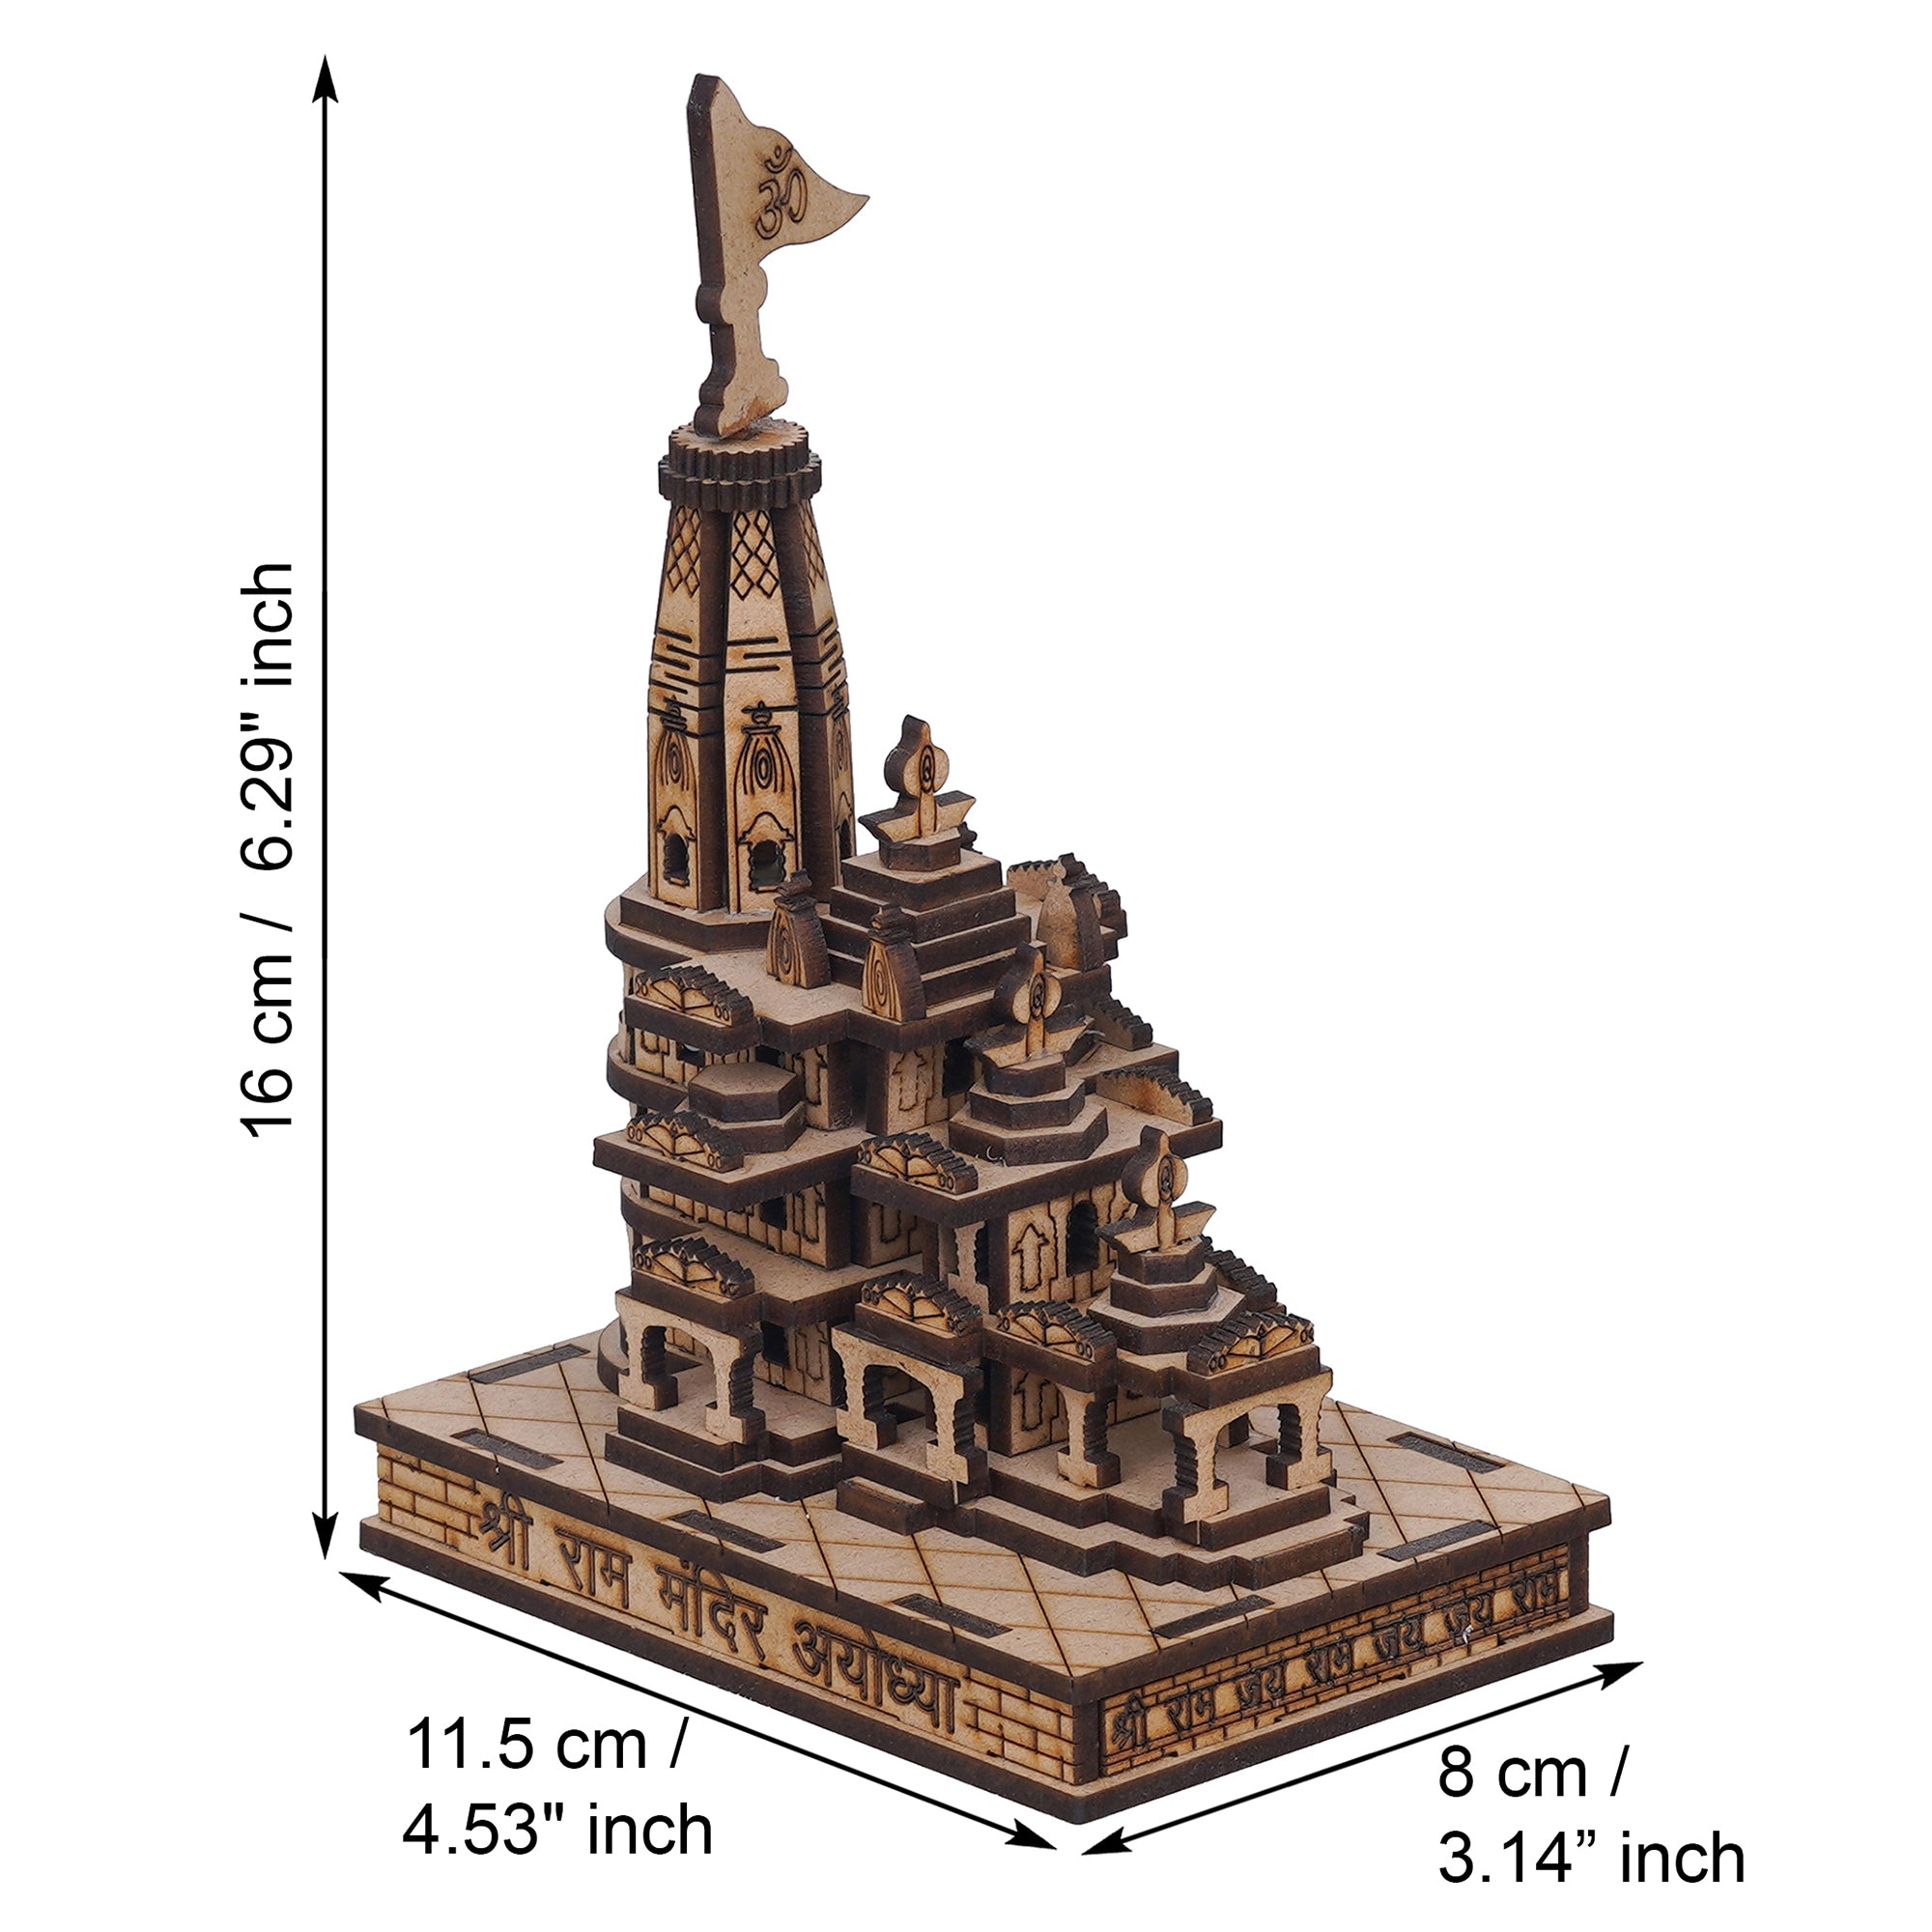 eCraftIndia Shri Ram Mandir Ayodhya Model - Wooden MDF Craftsmanship Authentic Designer Temple with Protective Gift Box - Ideal for Home Temple, Decor, and Spiritual Gifting 3